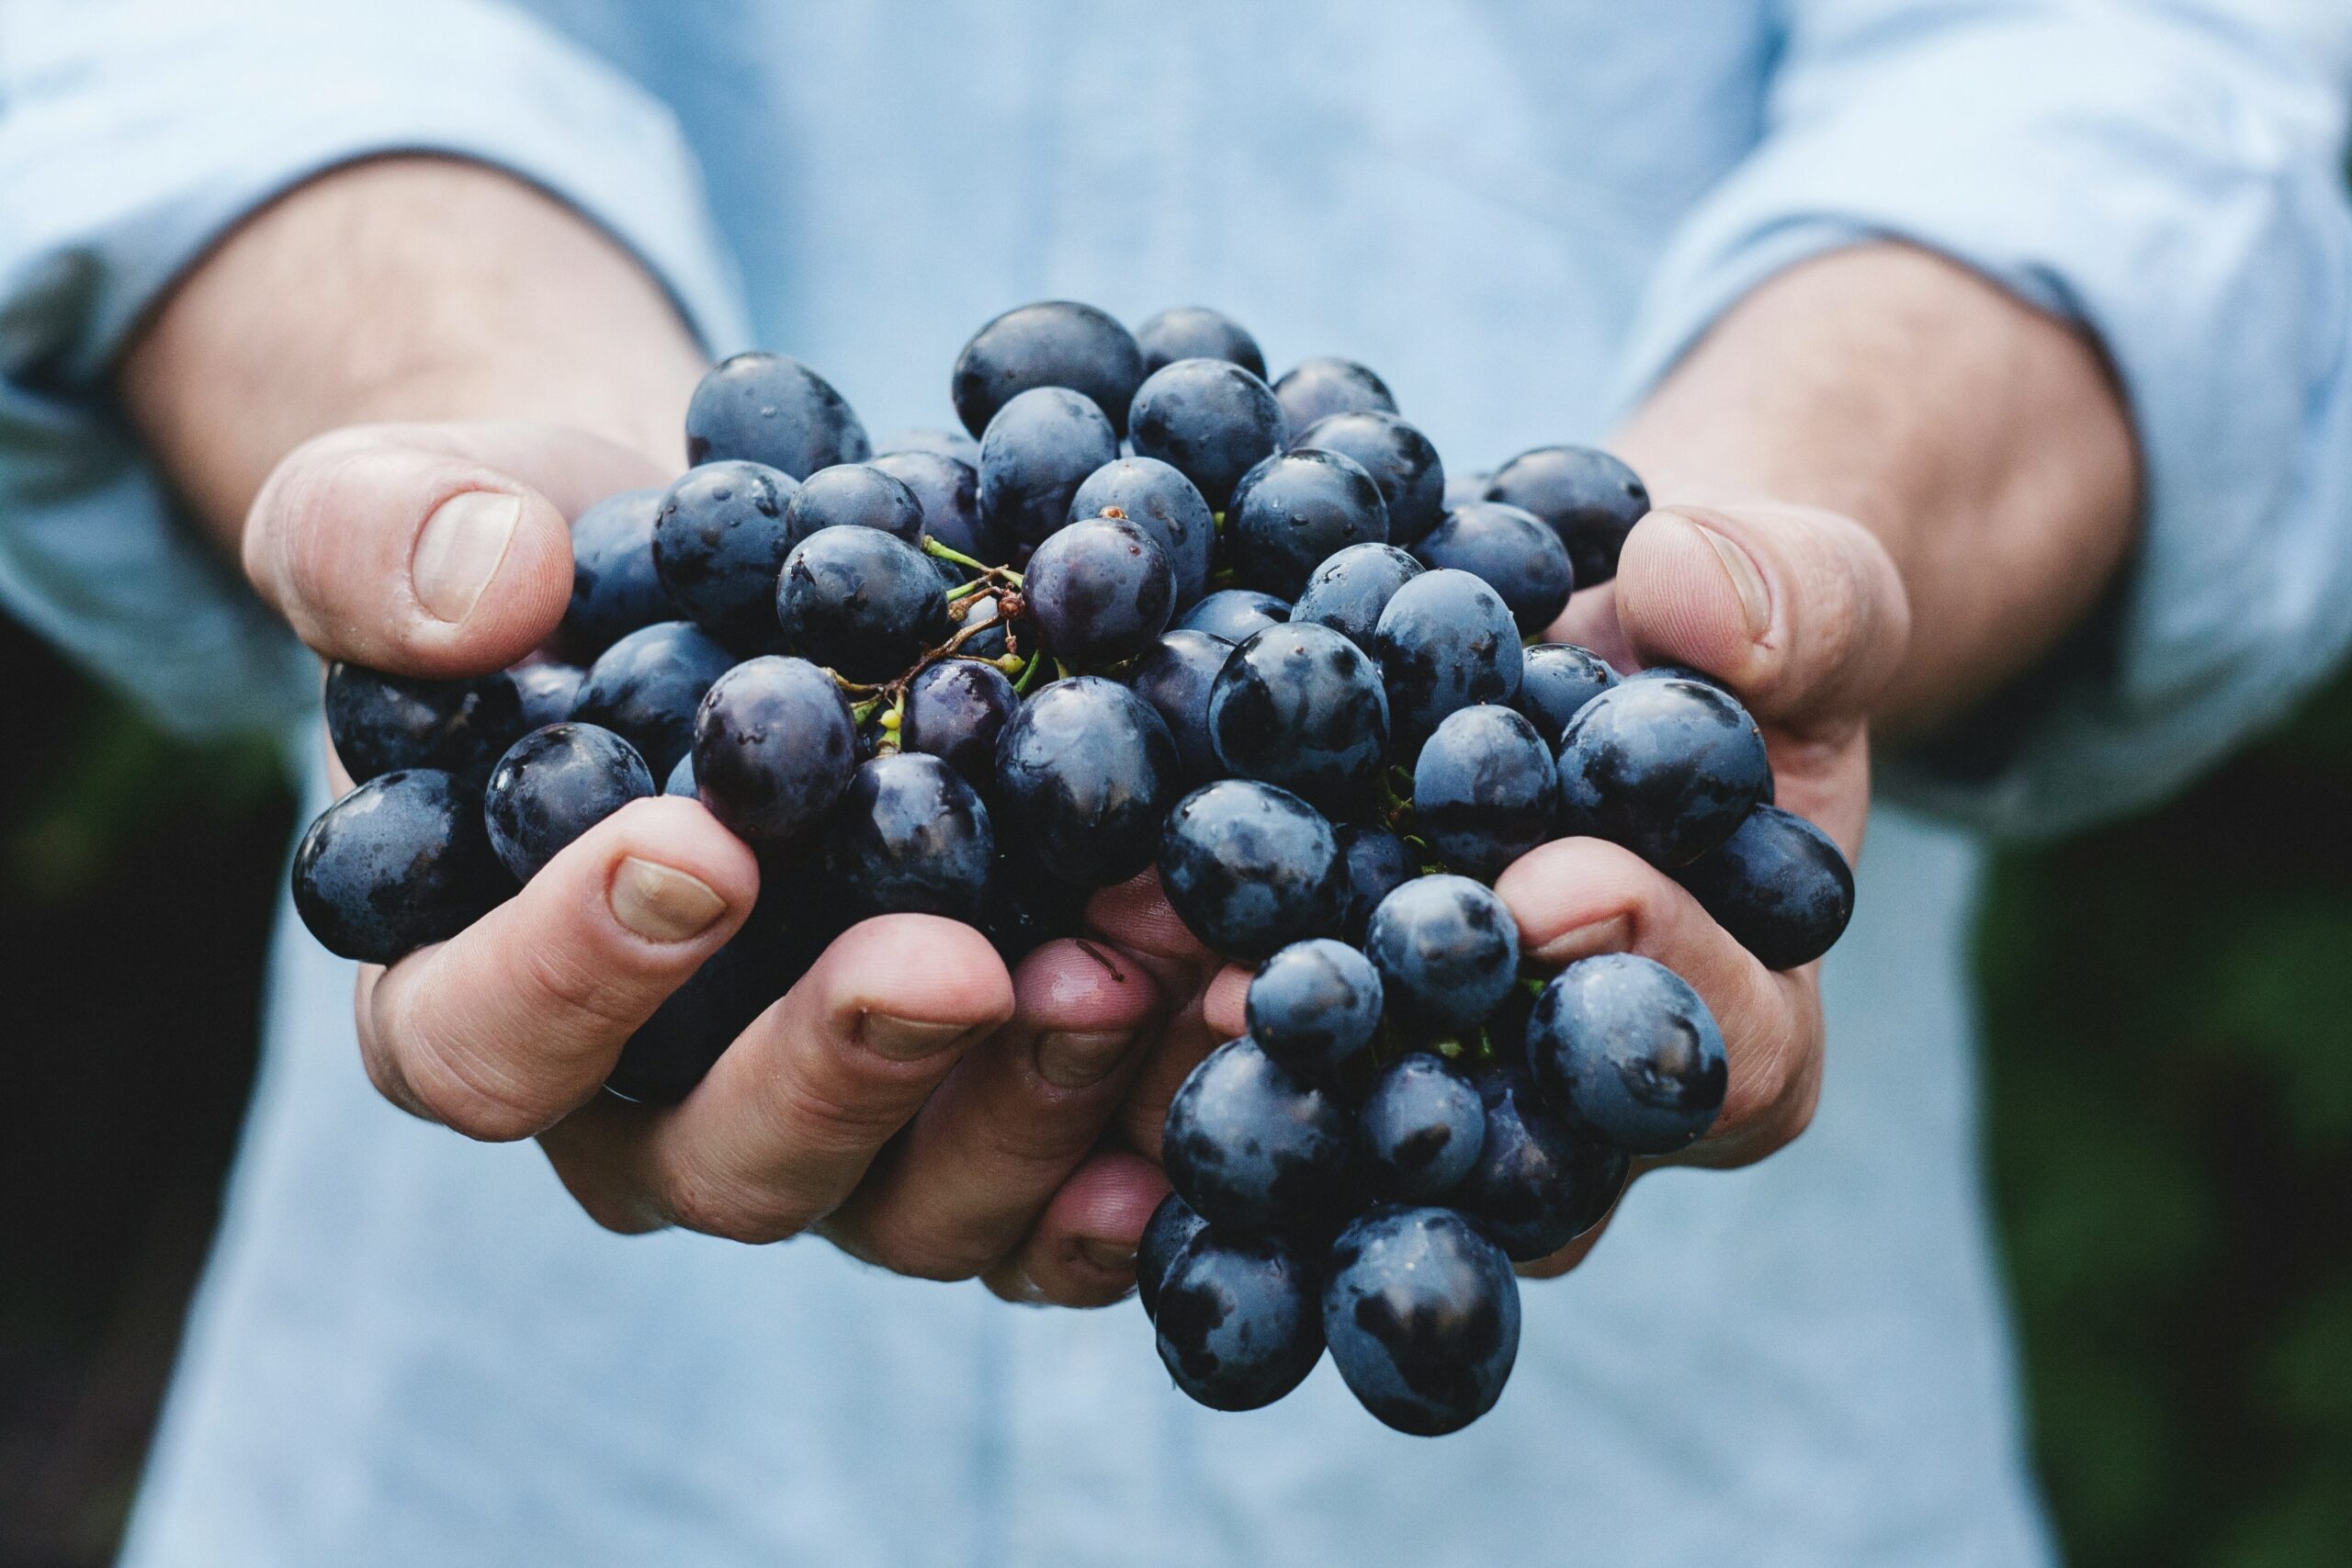 Hands holding a bundle of red grapes